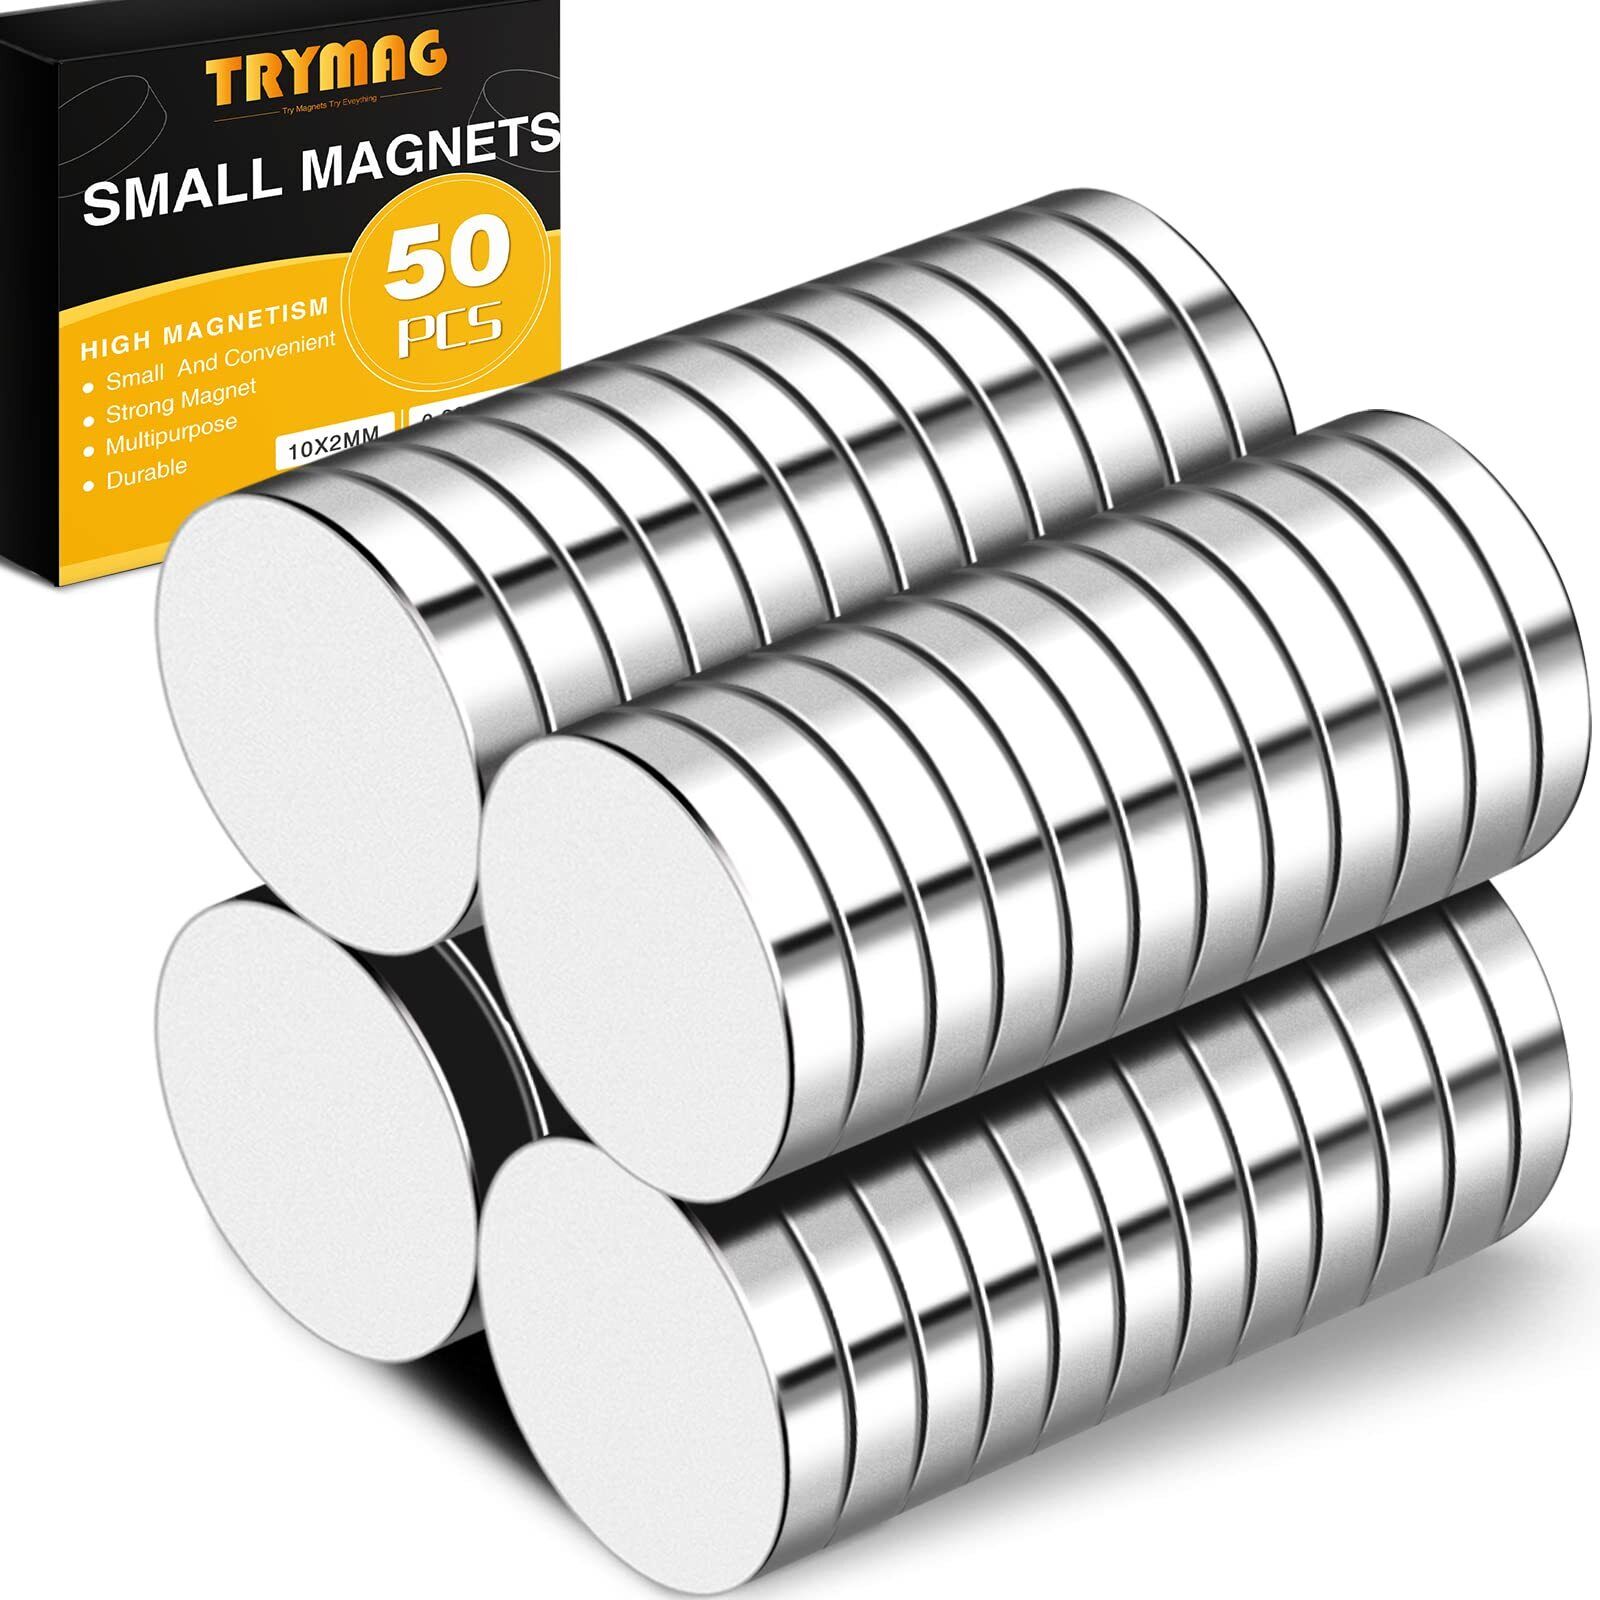 TRYMAG Magnets, 10x2mm 50 PCS Small Refrigerator Magnets Round Disc Magnets, ...